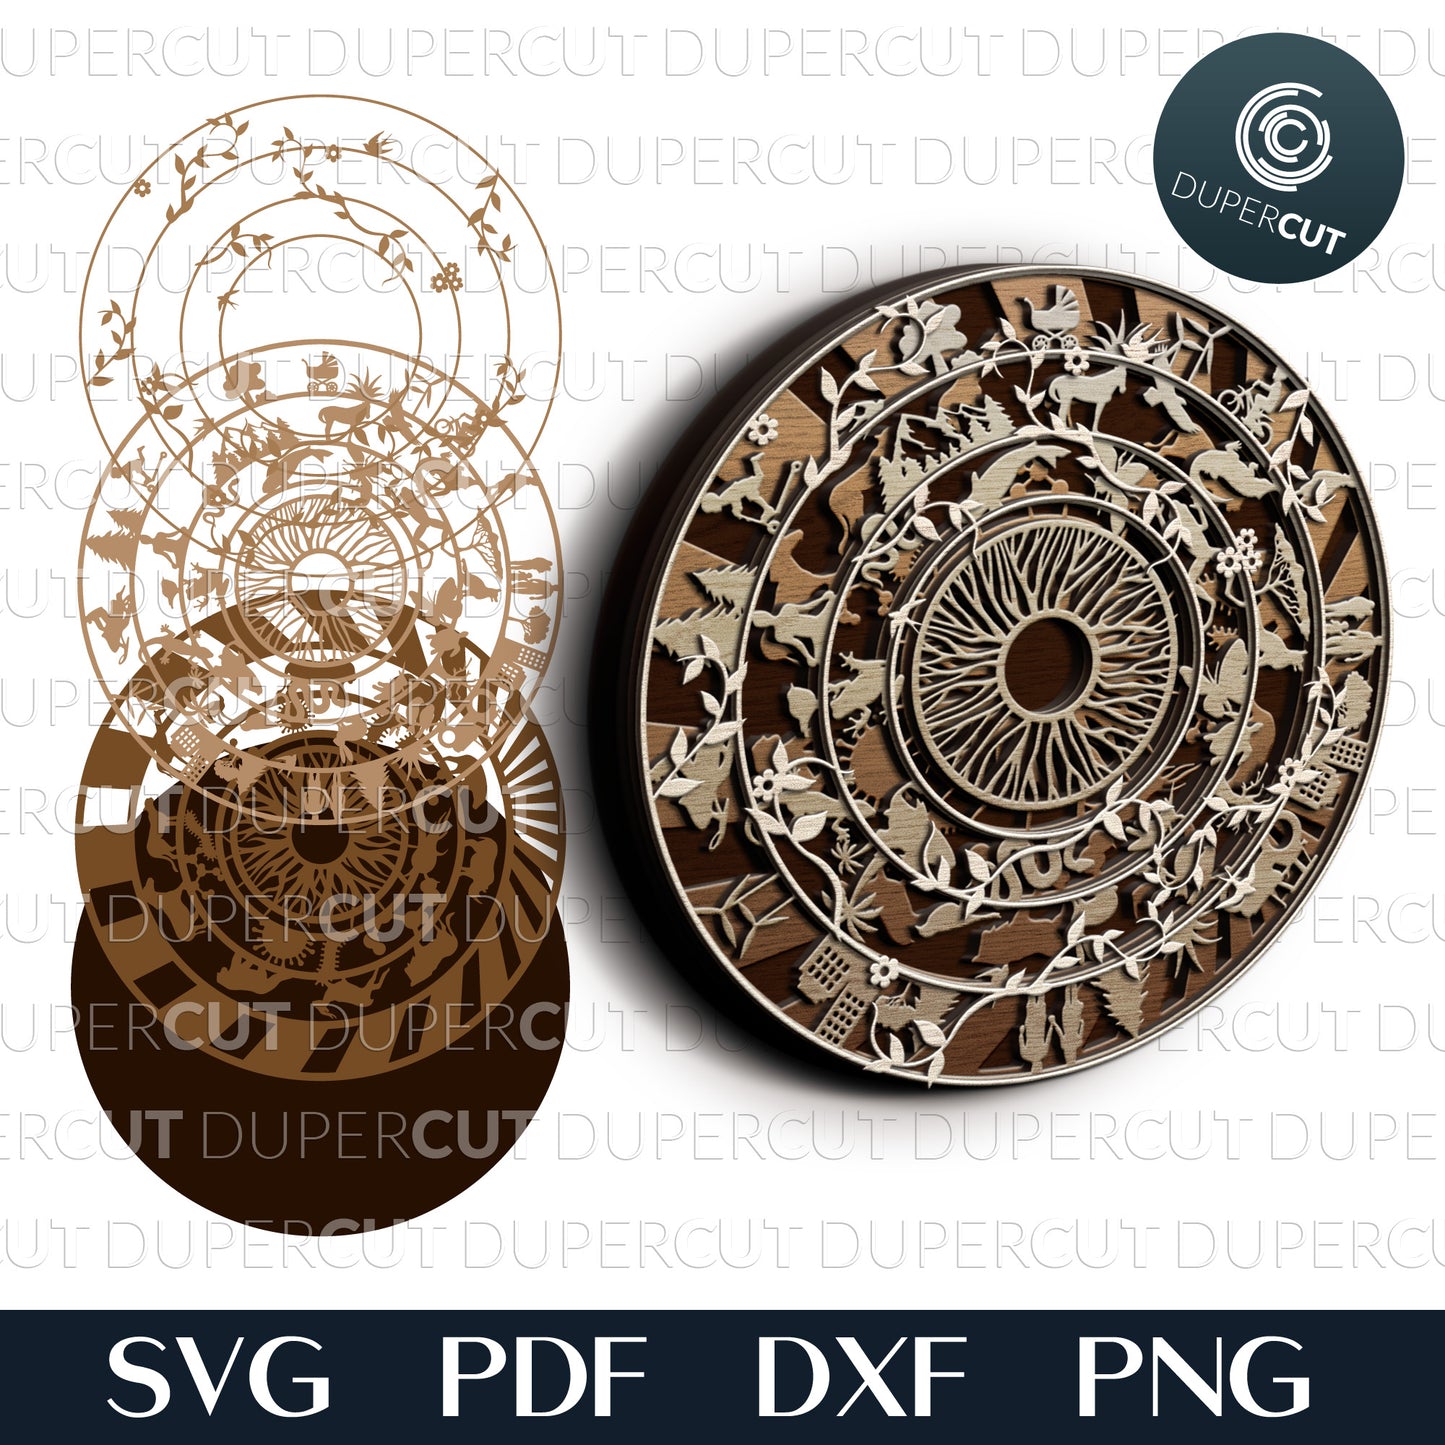 Our planet, Cradle of life - multi-layered cutting files - SVG PDF DXF vector template for laser machines Glowforge, Cricut, Silhouette, CNC Plasma